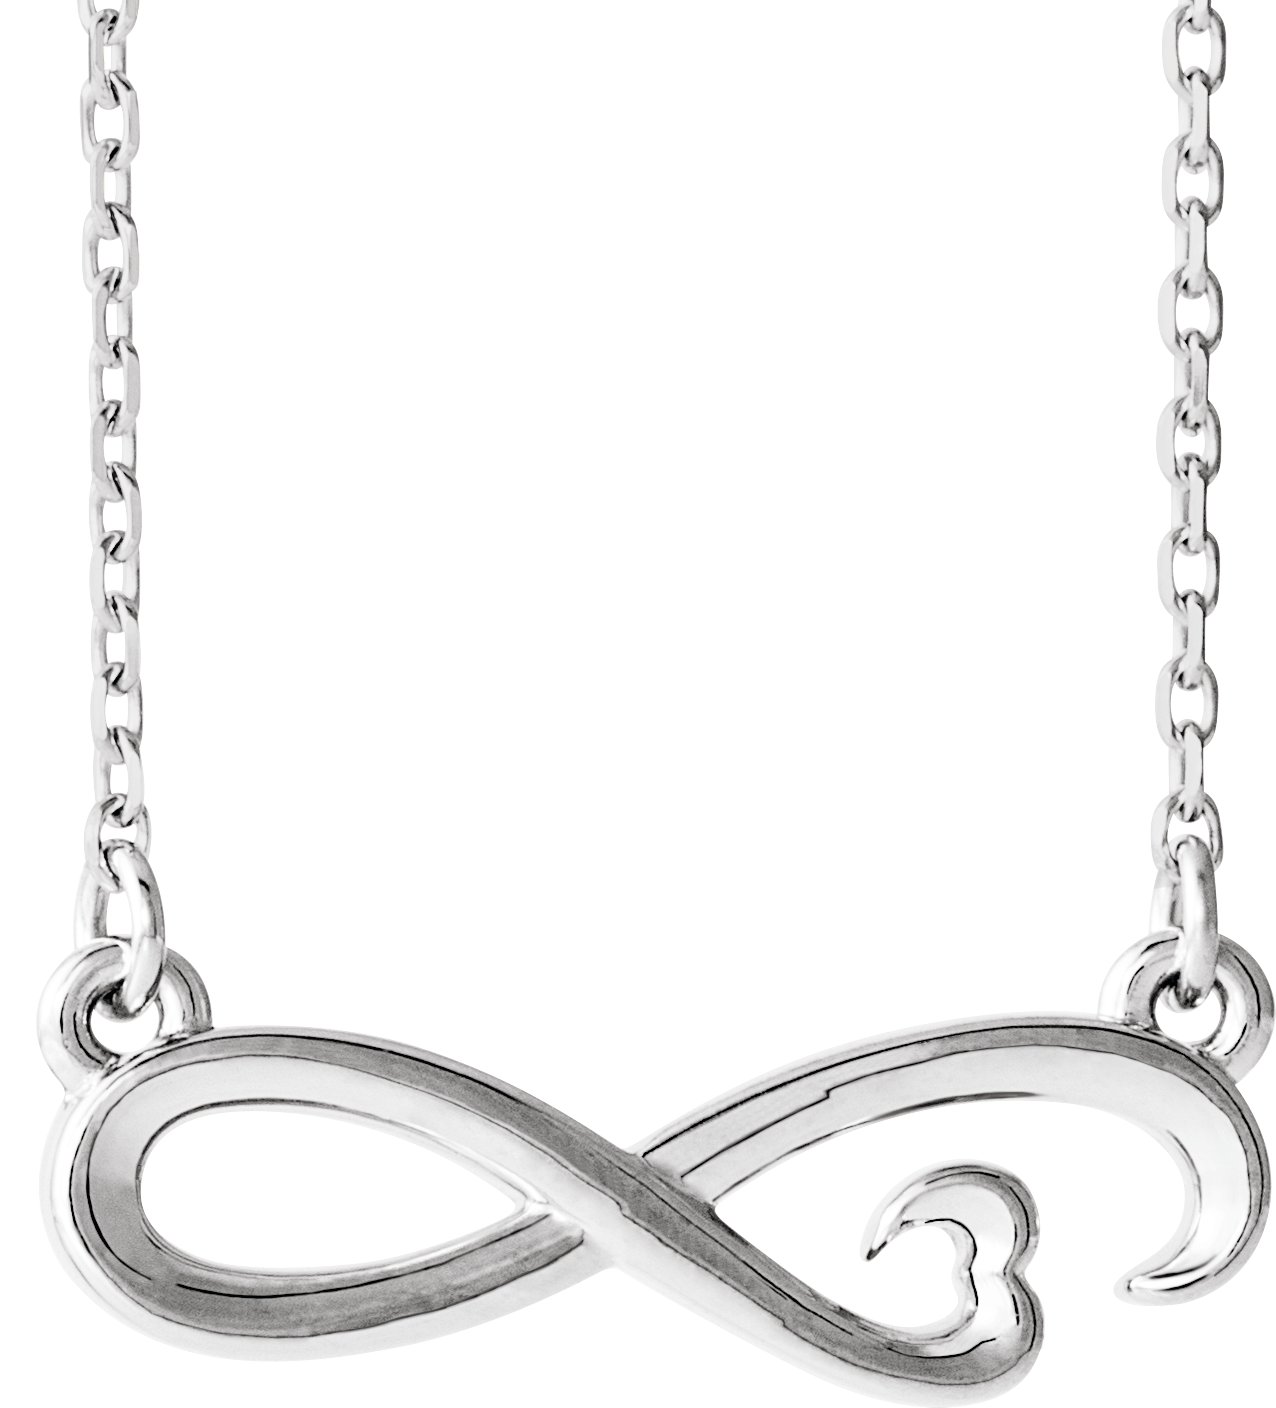 Sterling Silver Infinity-Inspired Heart 16-18" Necklace